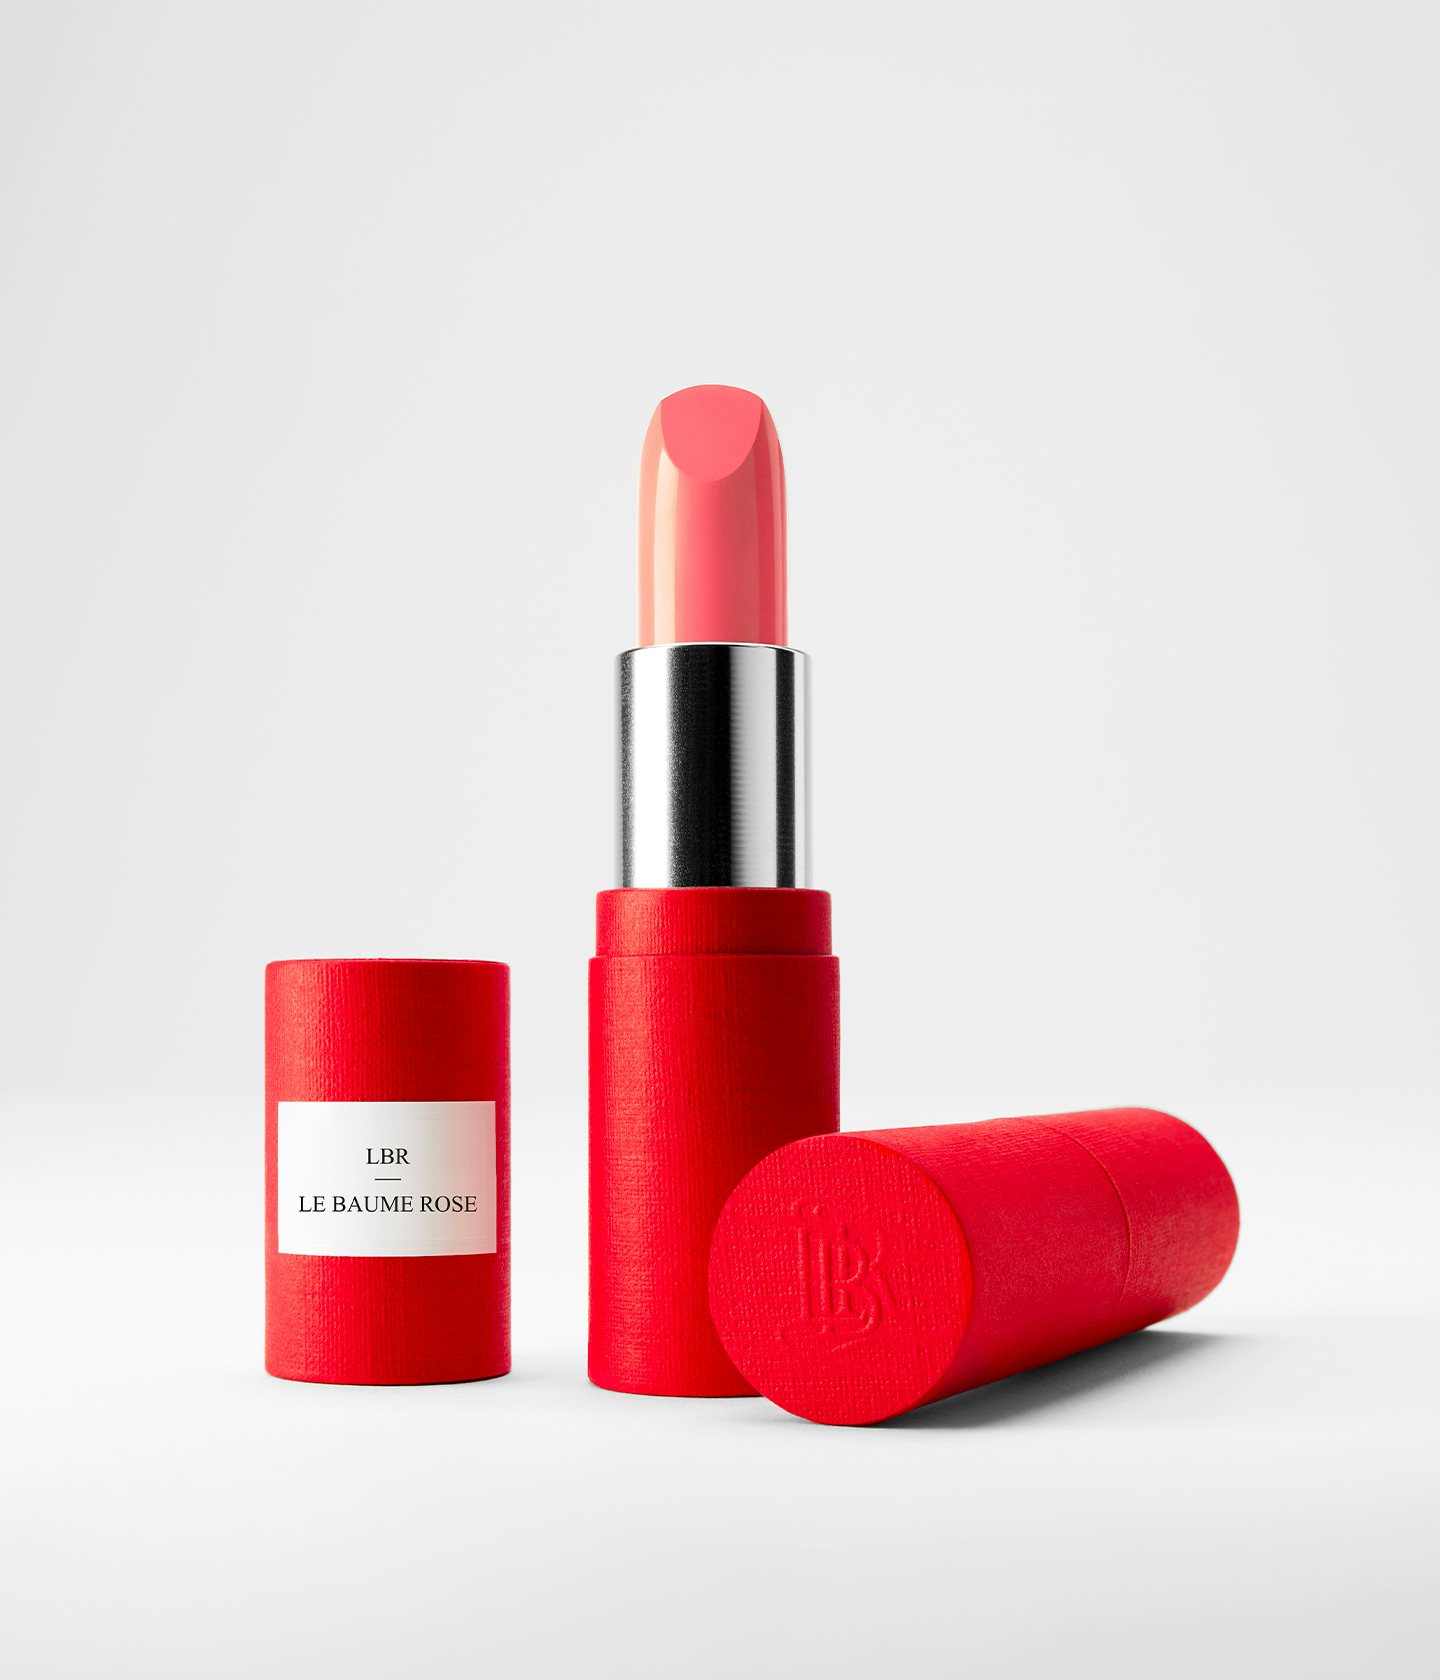 La bouche rouge Pink balm lipstick in the red paper case